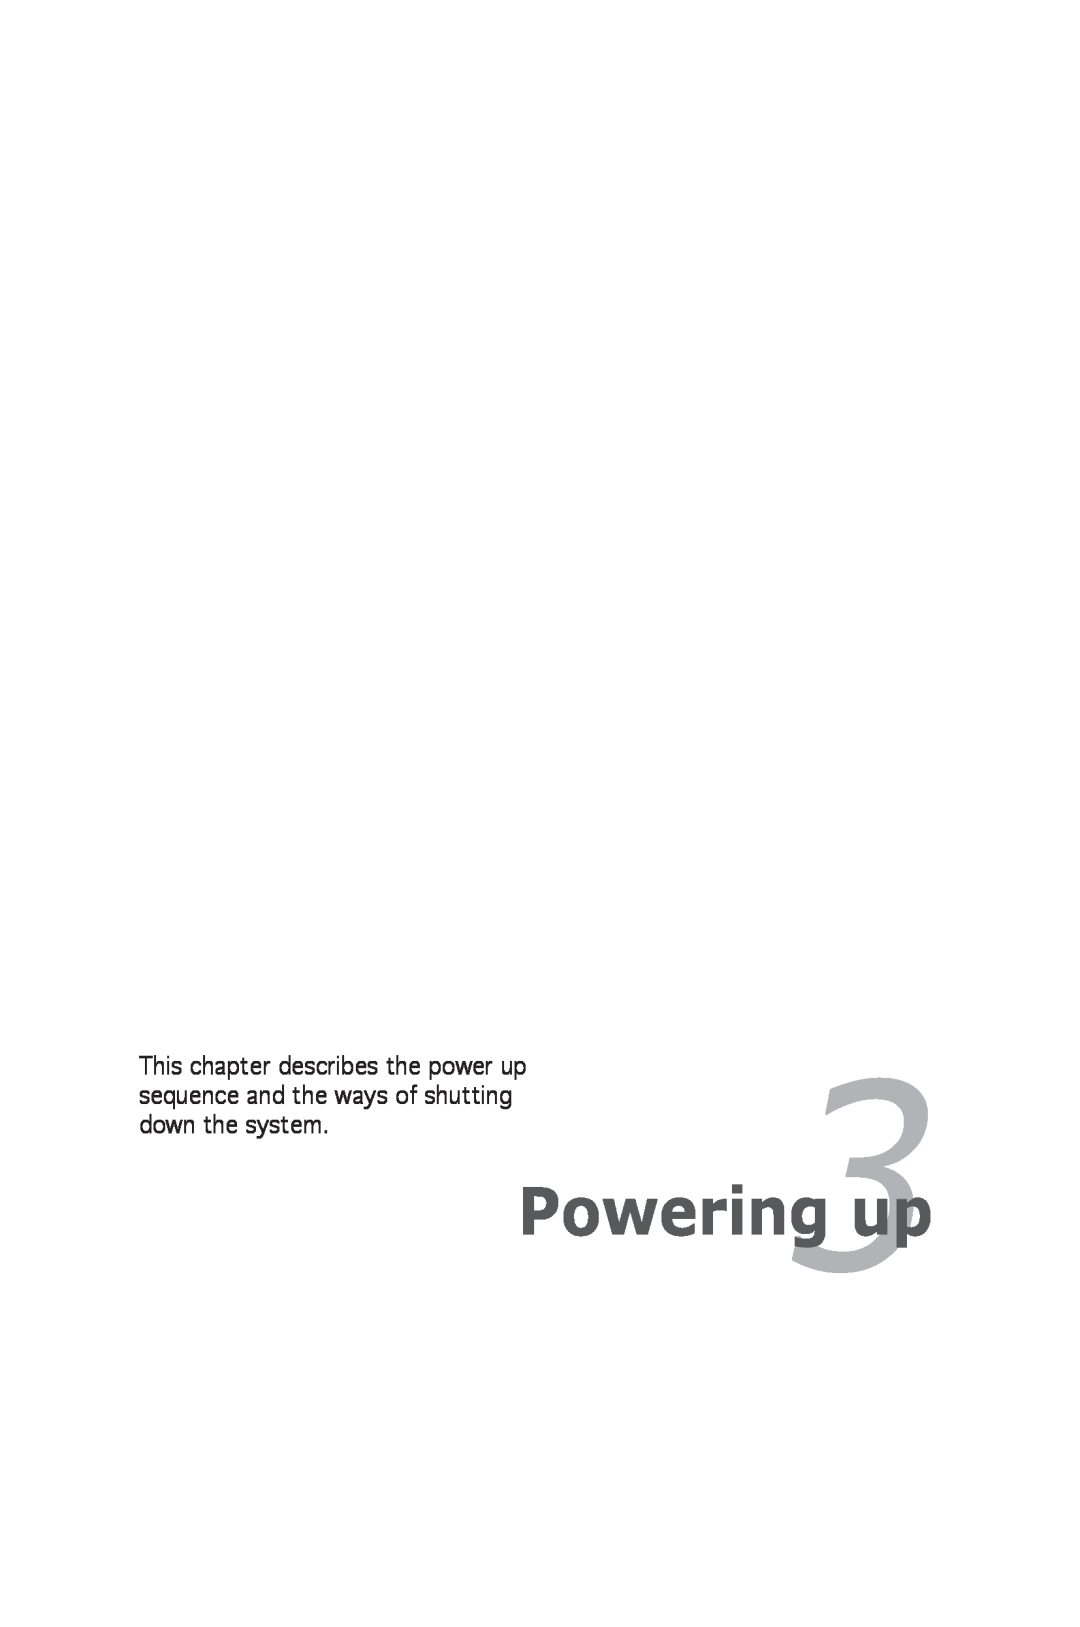 Asus A8N-SLI SE manual Powering up, This chapter describes the power up, down the system 